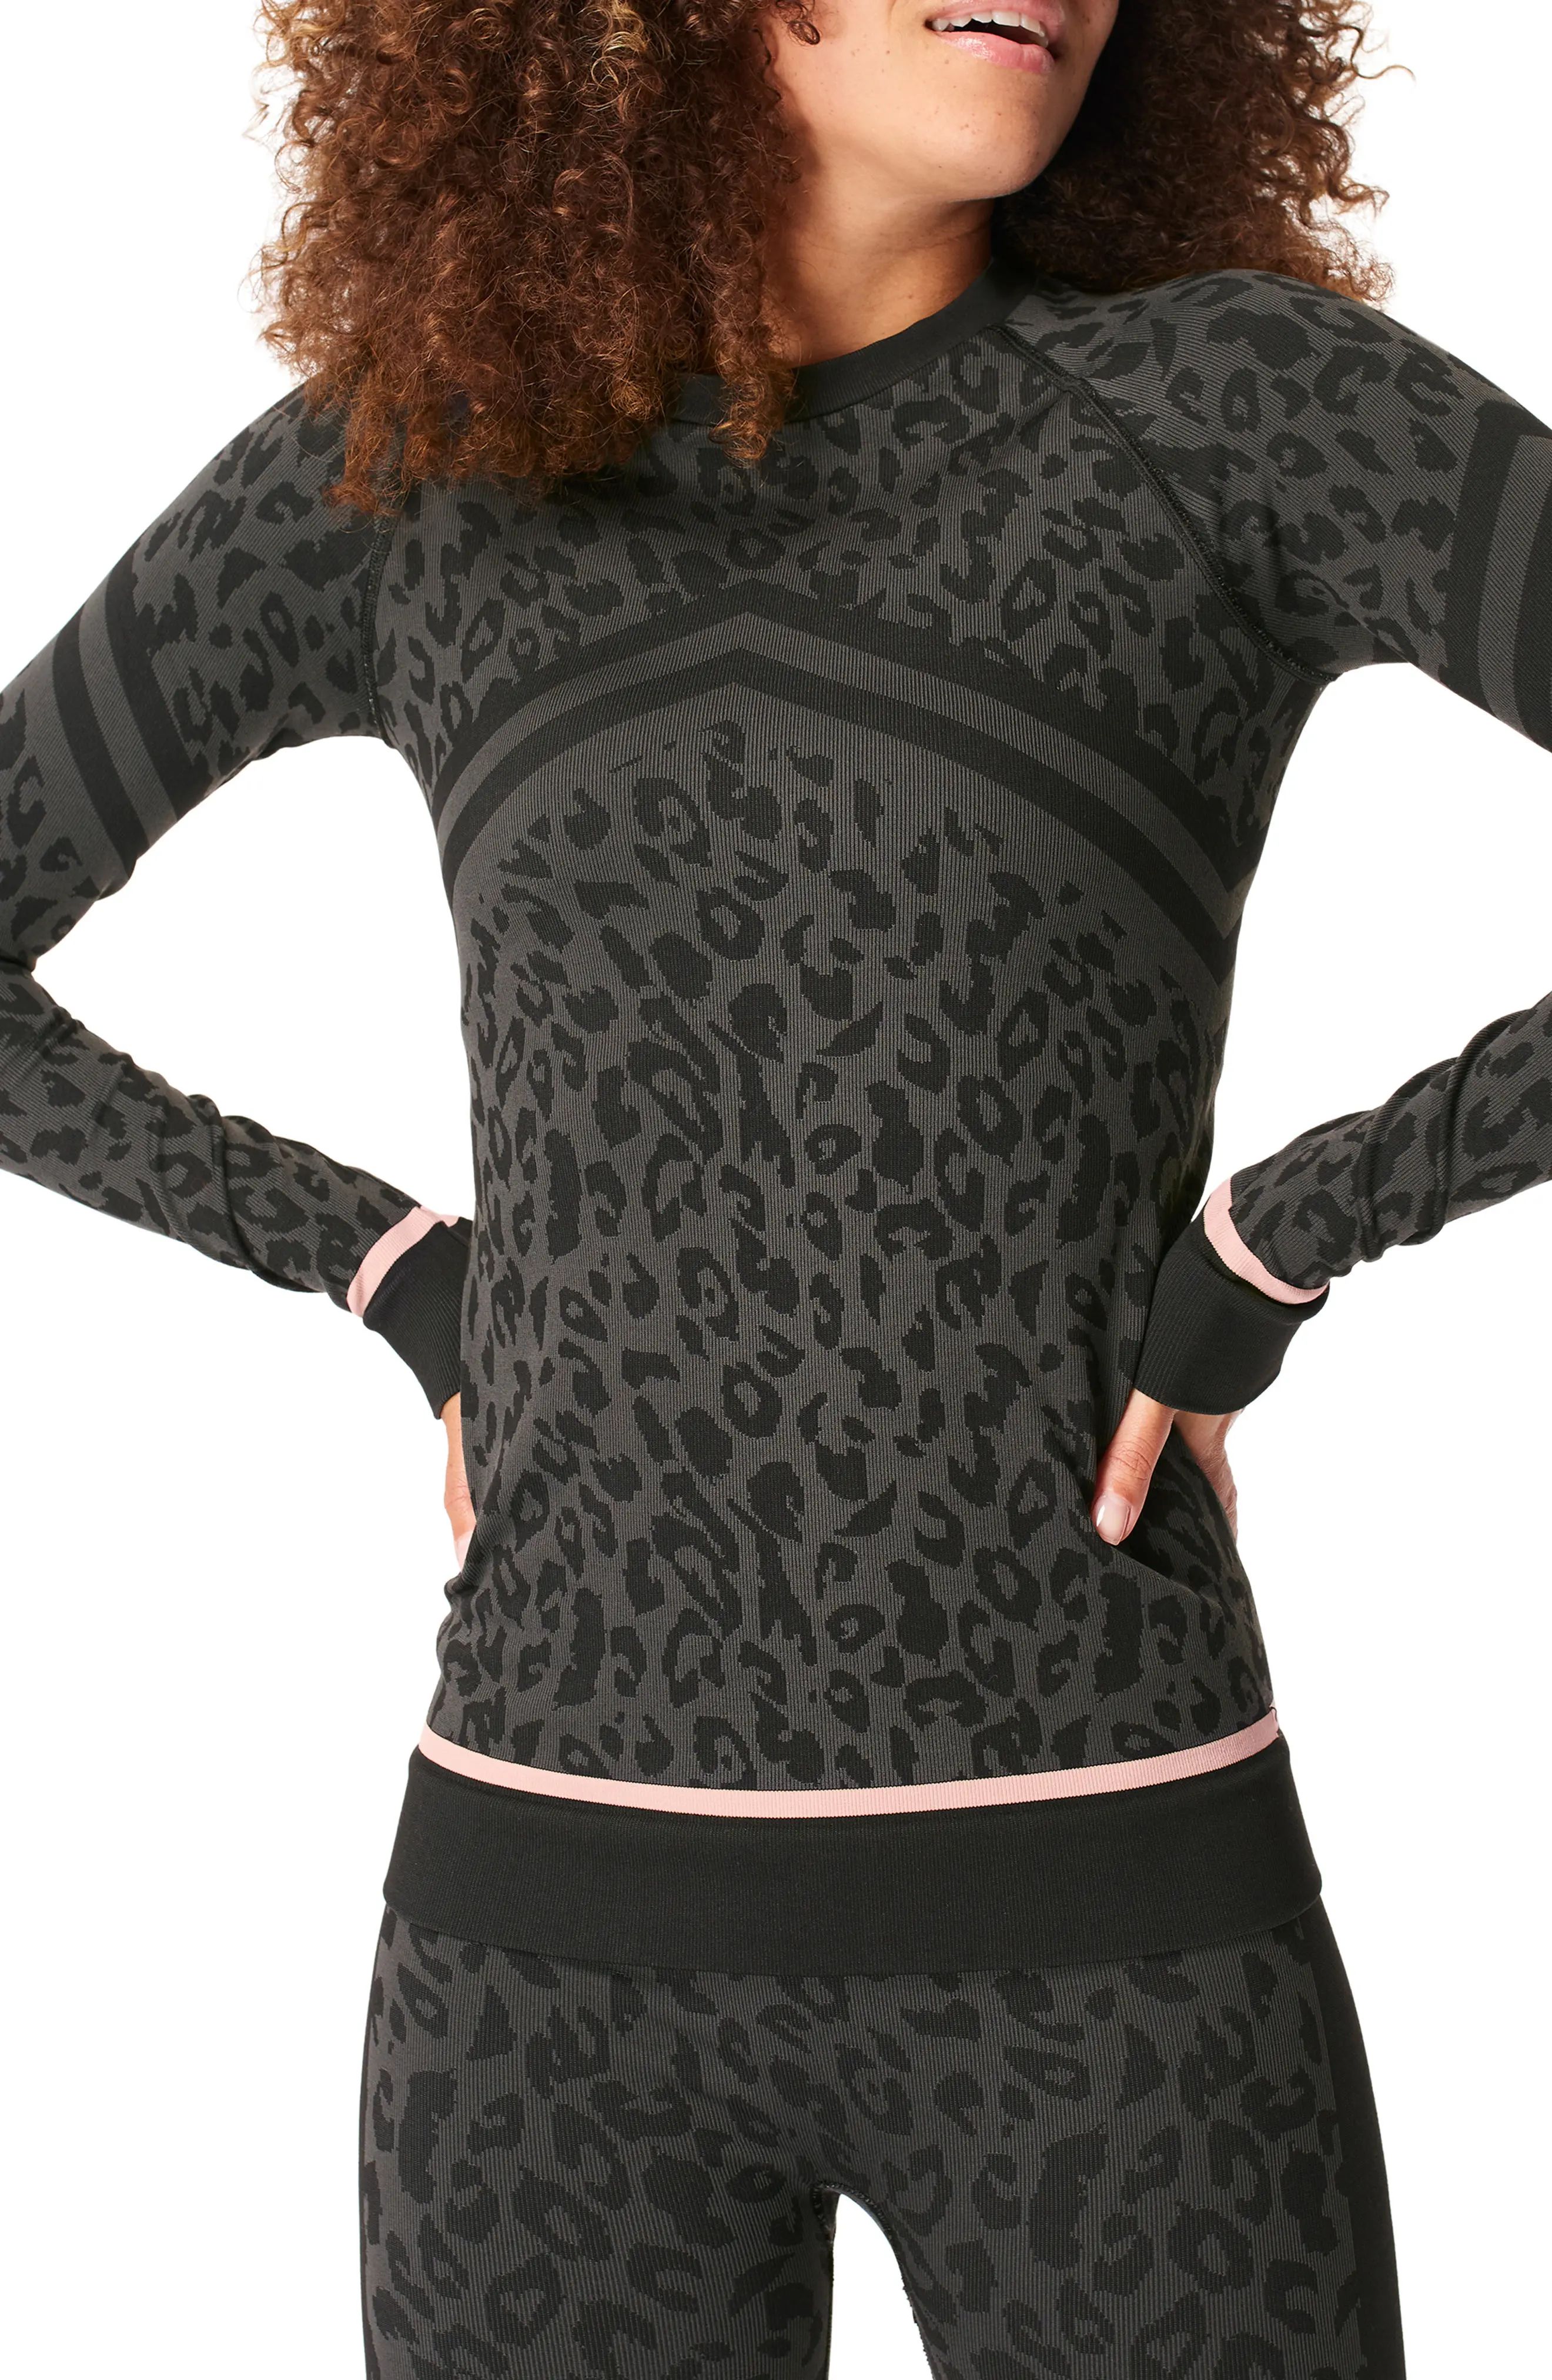 Sweaty Betty Ski Base Layer Top in Animal Leopard at Nordstrom, Size Small | Nordstrom